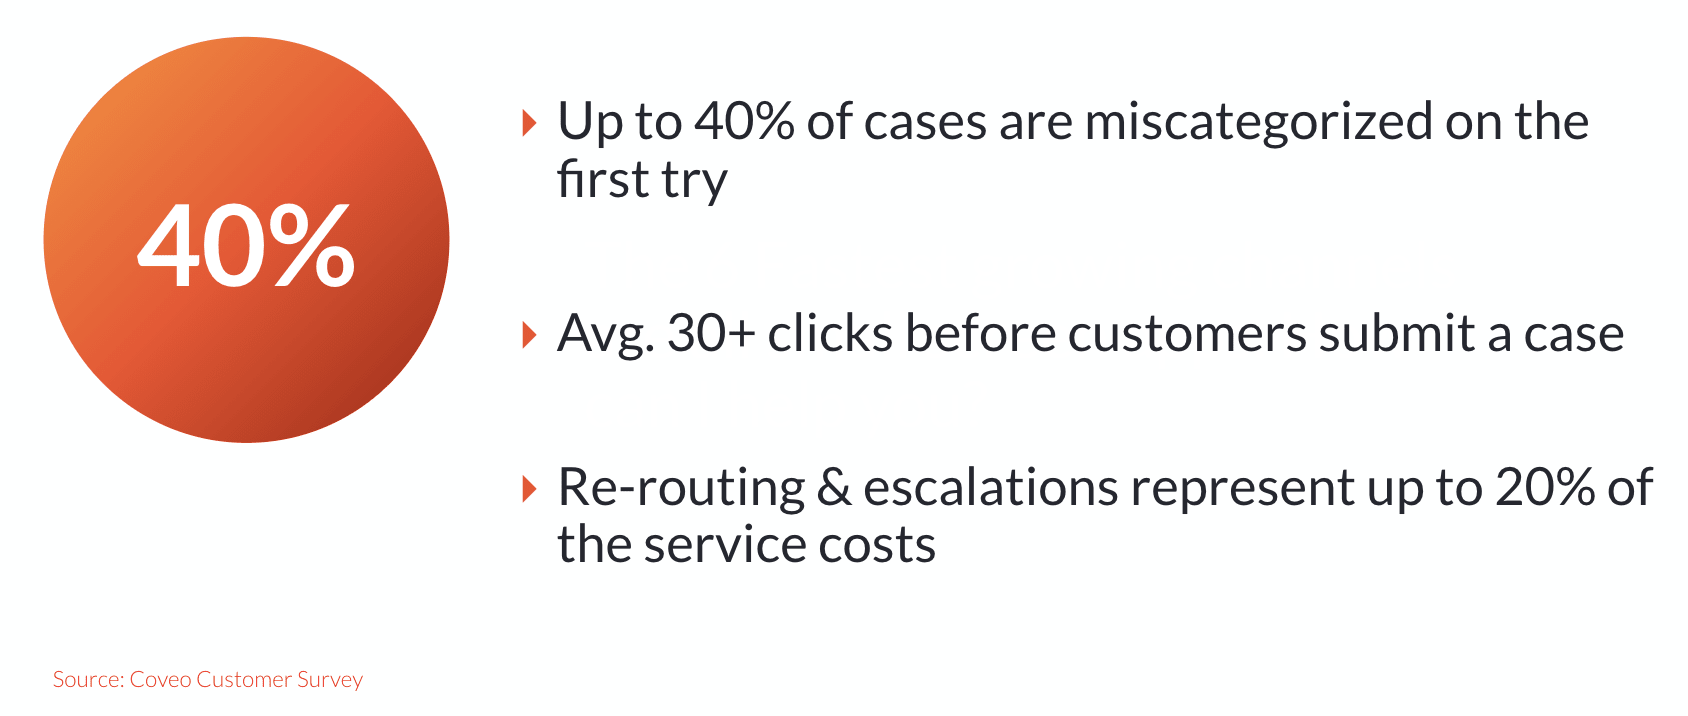 role of case deflection in omnichannel customer service strategy